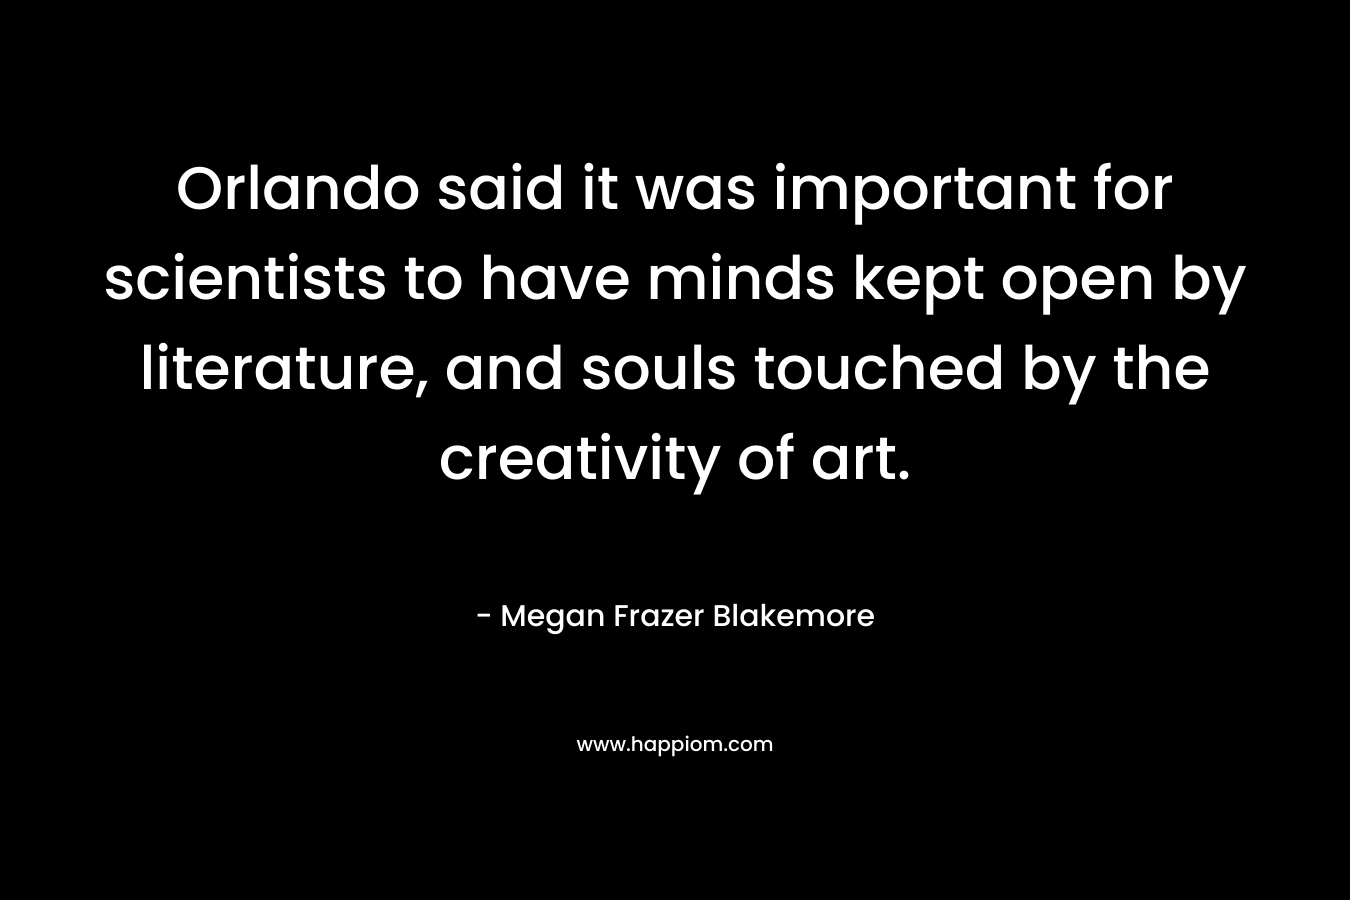 Orlando said it was important for scientists to have minds kept open by literature, and souls touched by the creativity of art. – Megan Frazer Blakemore